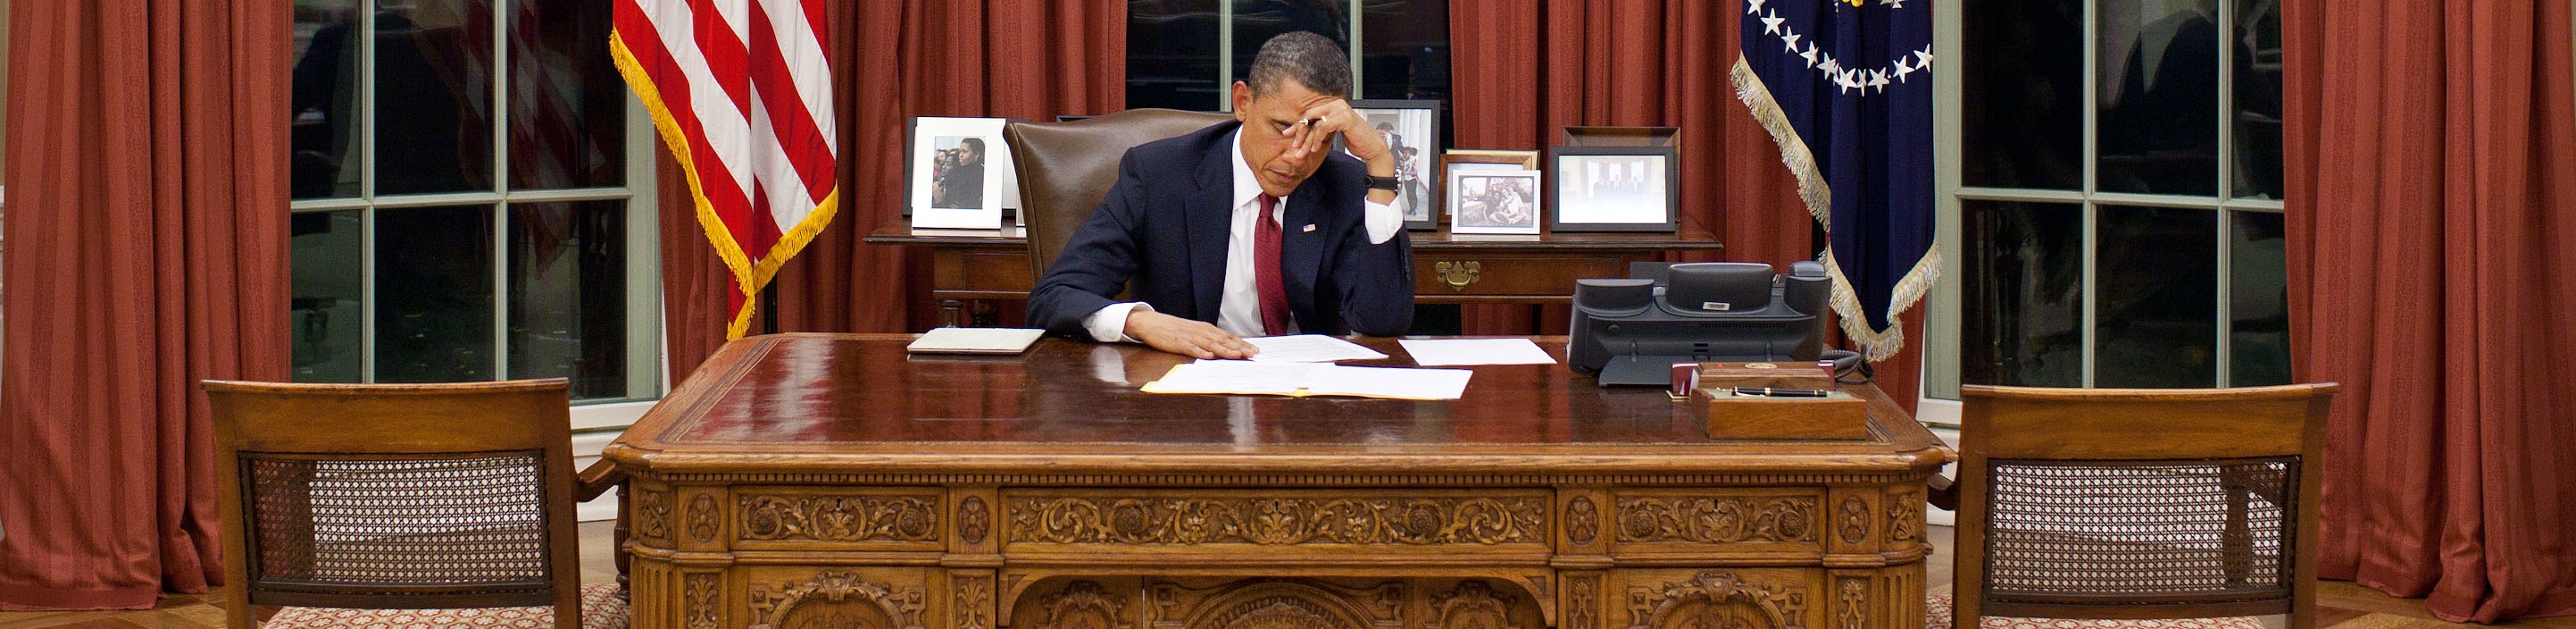 President Obama and Productivity